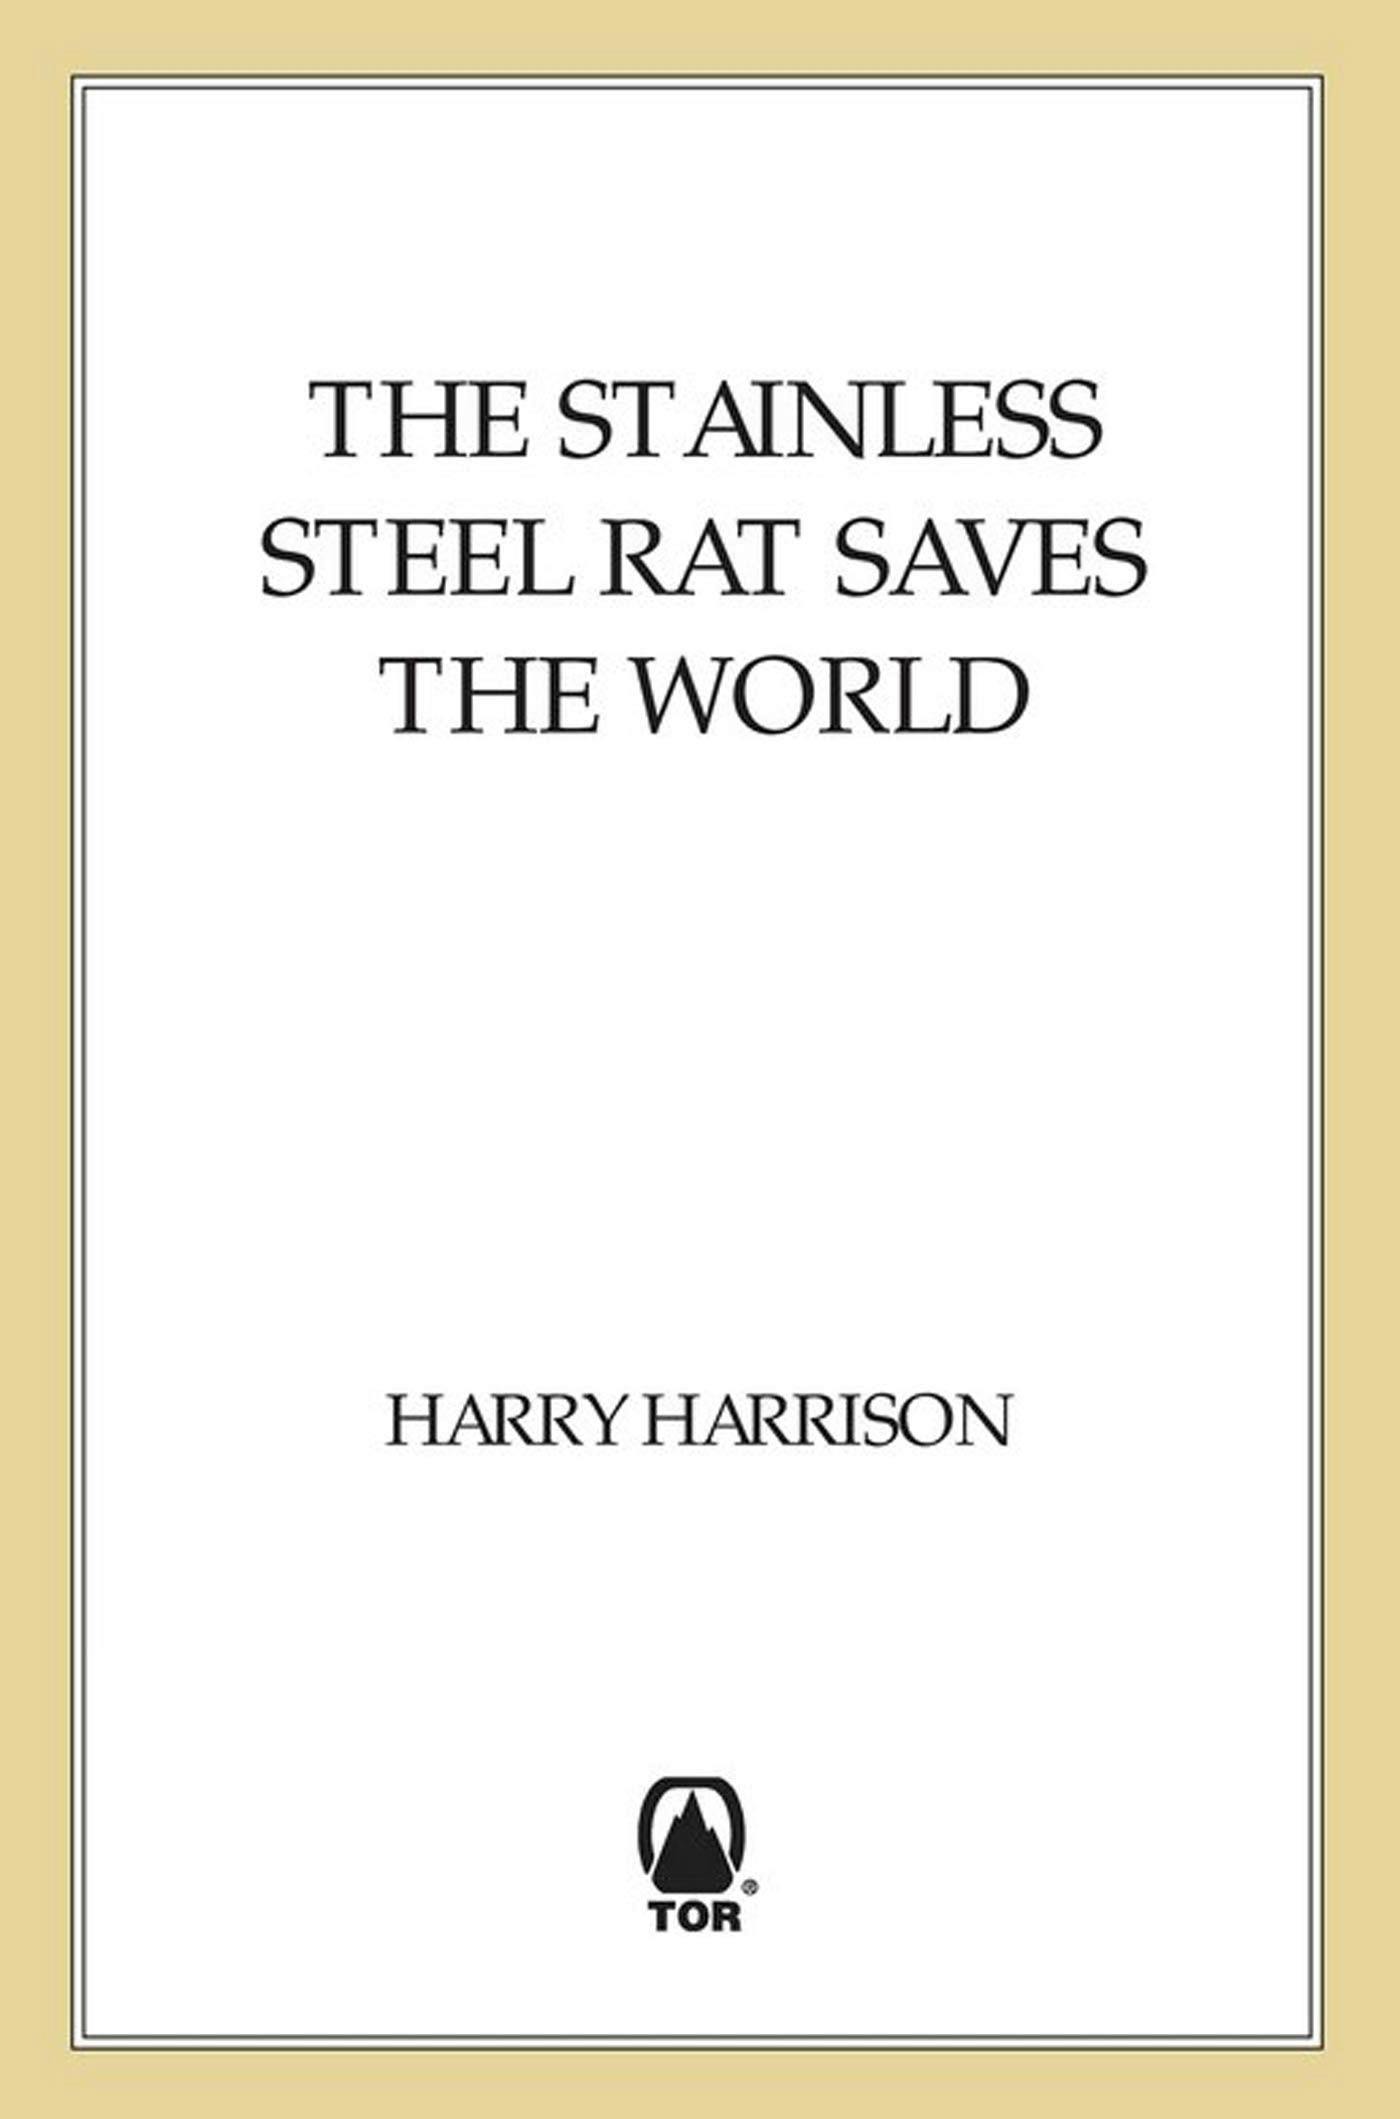 Cover for the book titled as: The Stainless Steel Rat Saves the World